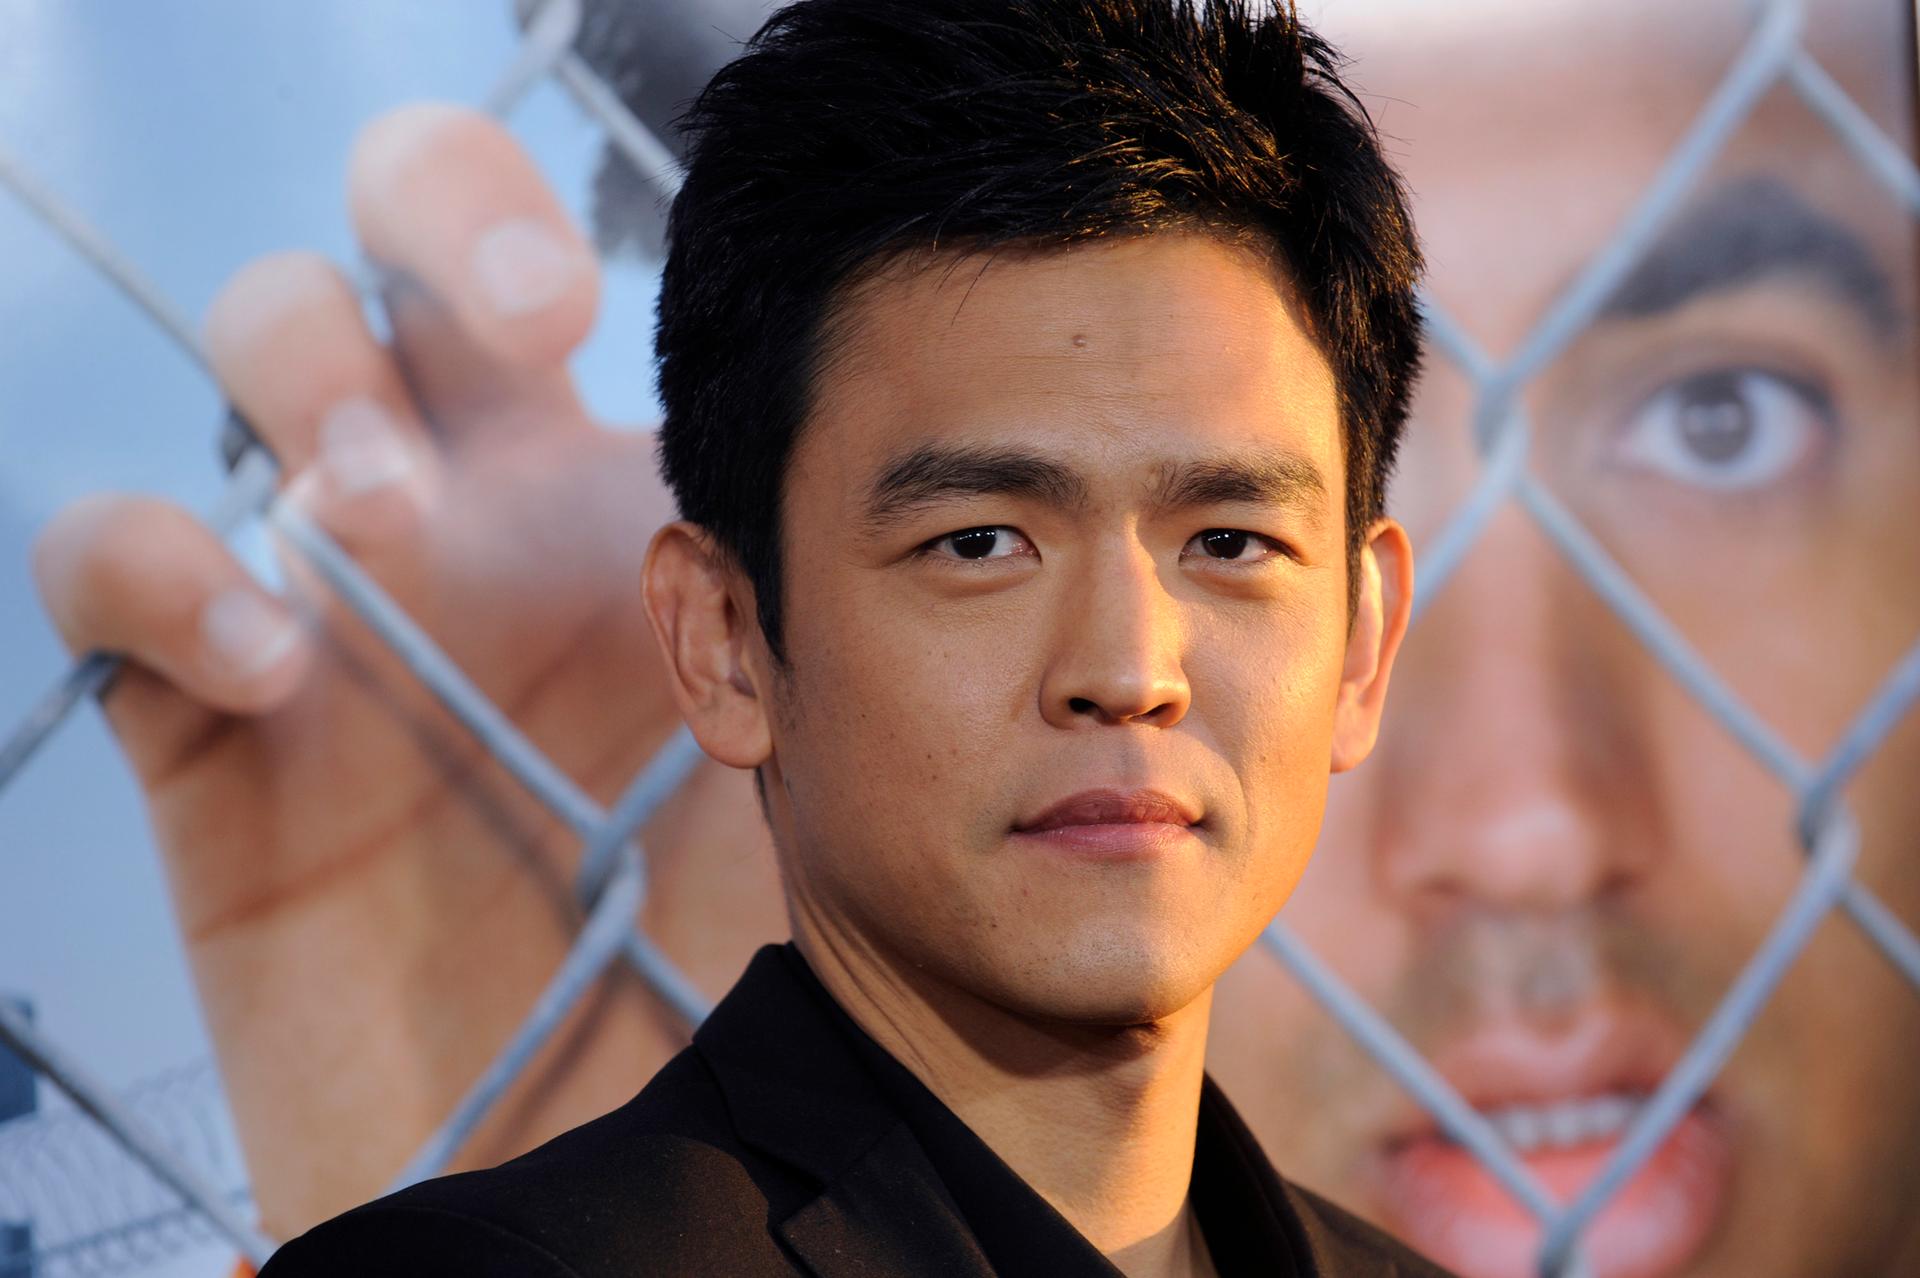 John Cho attends the premiere of "Harold and Kumar Escape from Guantanamo Bay" in Los Angeles April 17, 2008.